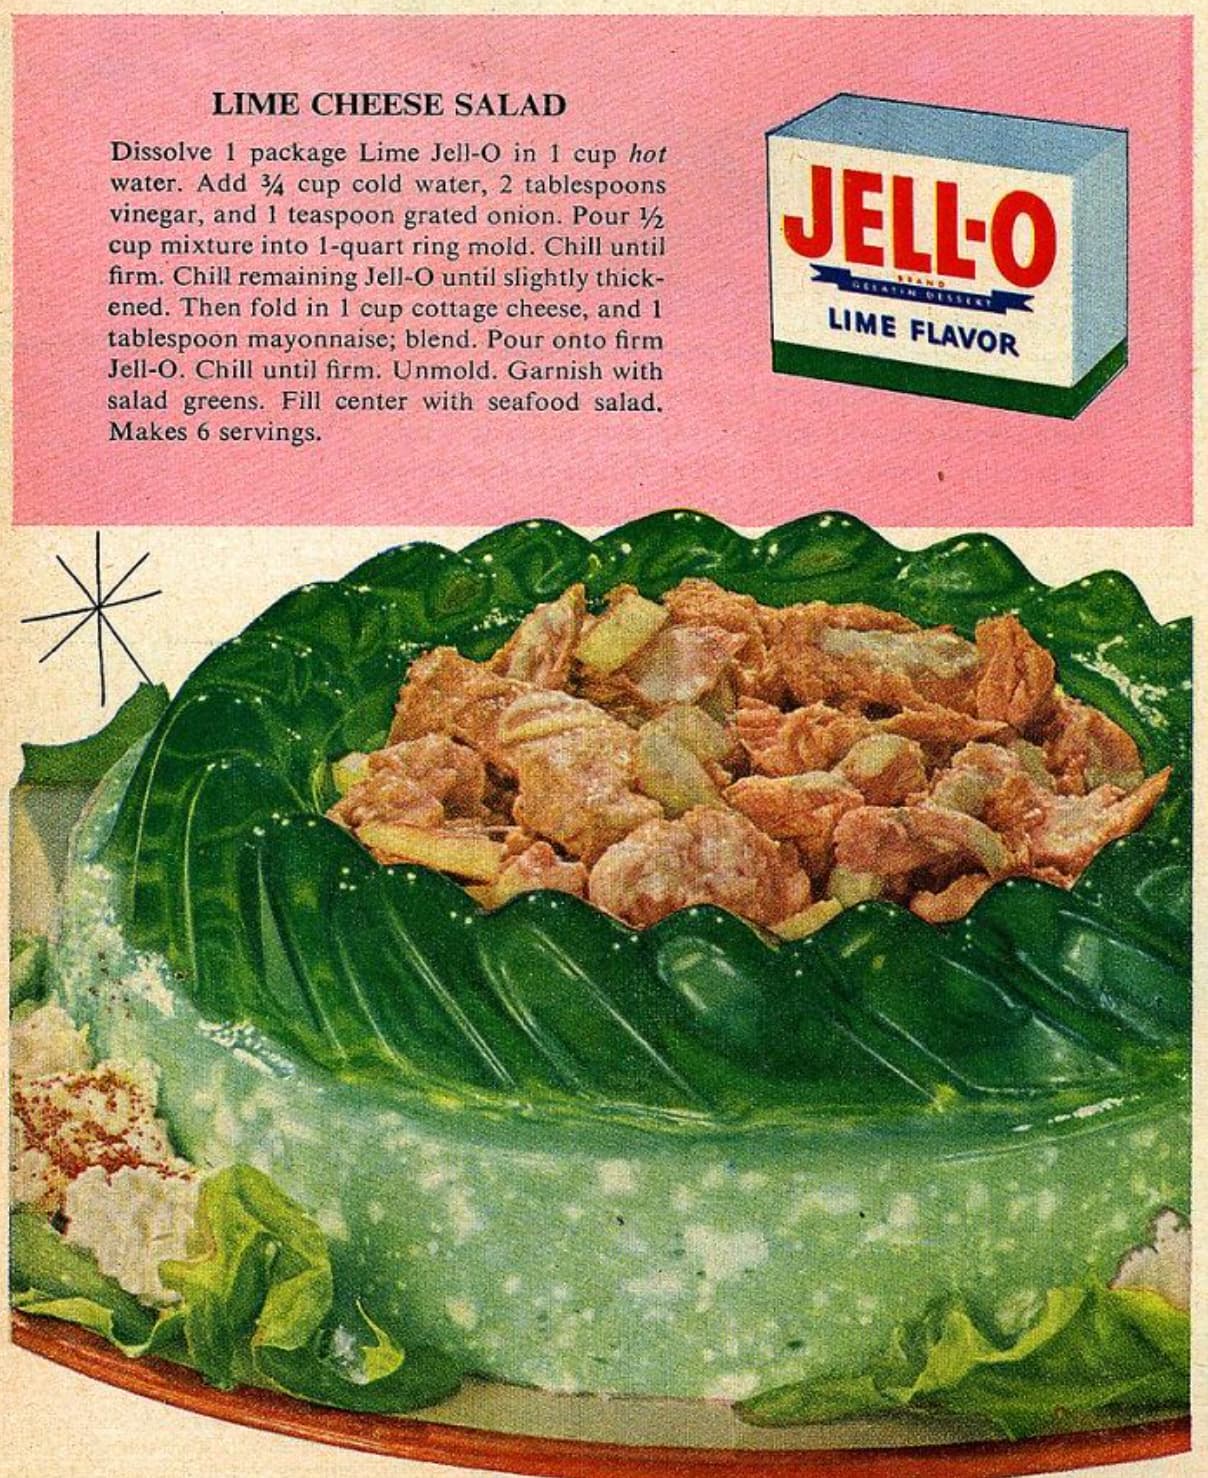 1950s salad - Lime Cheese Salad Dissolve 1 package Lime JellO in 1 cup hot water. Add 34 cup cold water, 2 tablespoons vinegar, and 1 teaspoon grated onion. Pour cup mixture into 1quart ring mold. Chill until firm. Chill remaining JellO until slightly thi